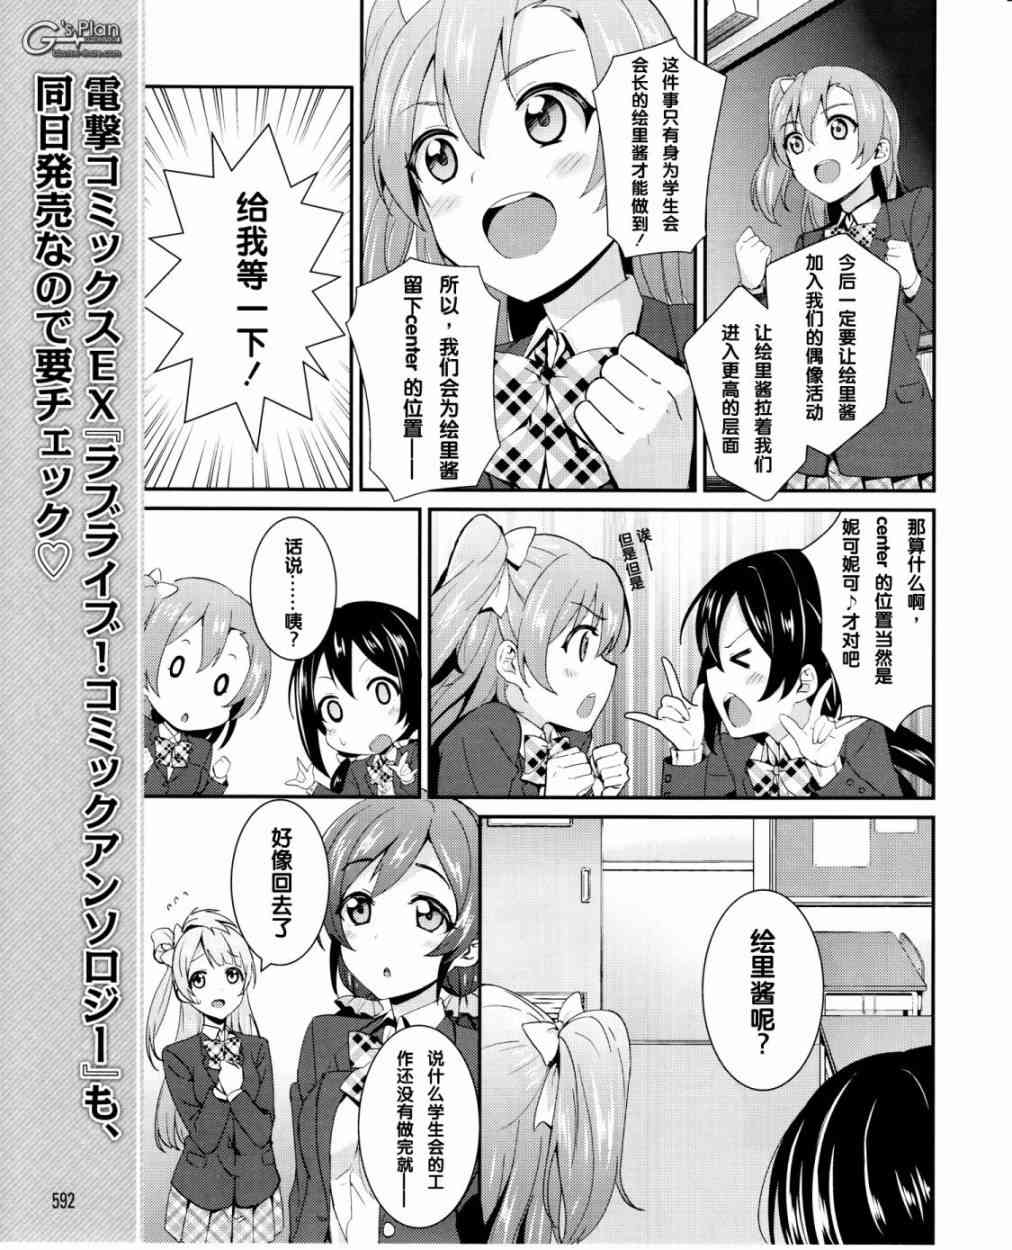 LoveLive - 16話 - 2